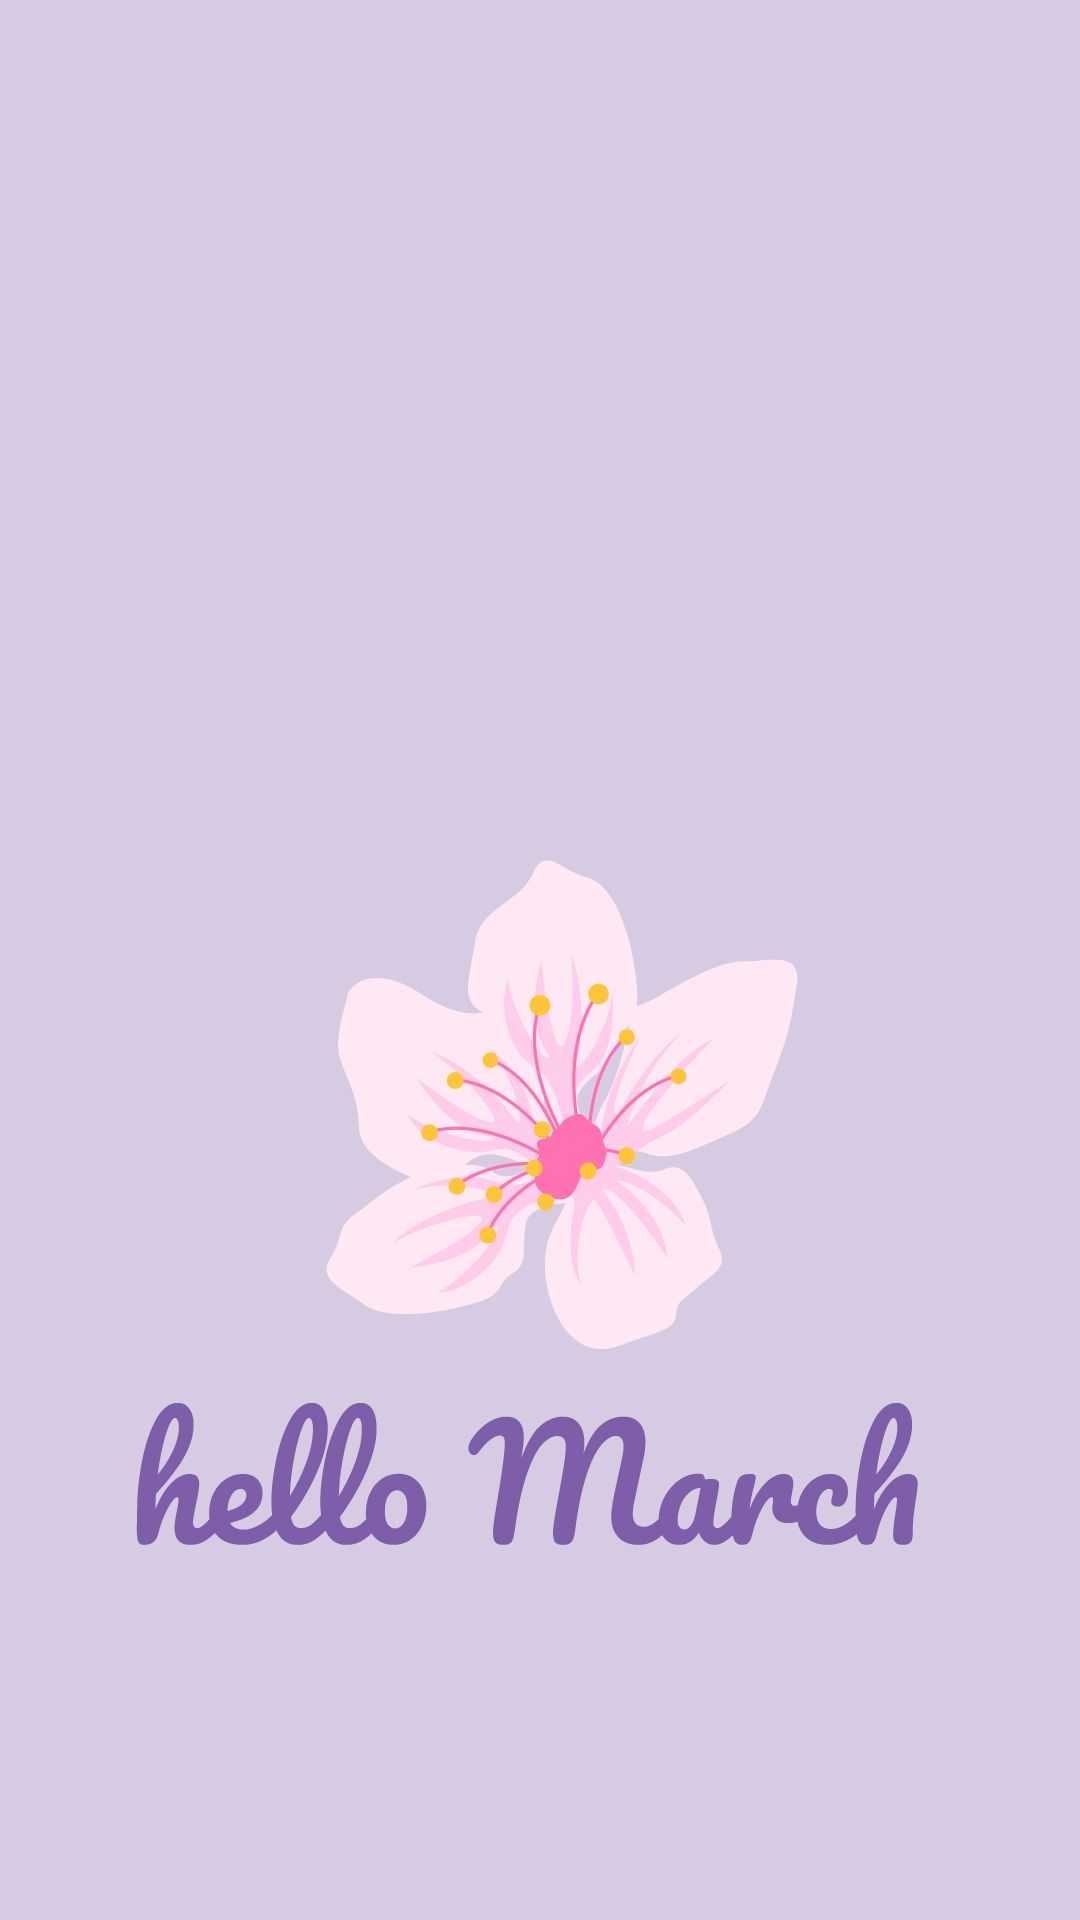 Hello March Image 2021 download march birthdays picture, wallpaper, pics